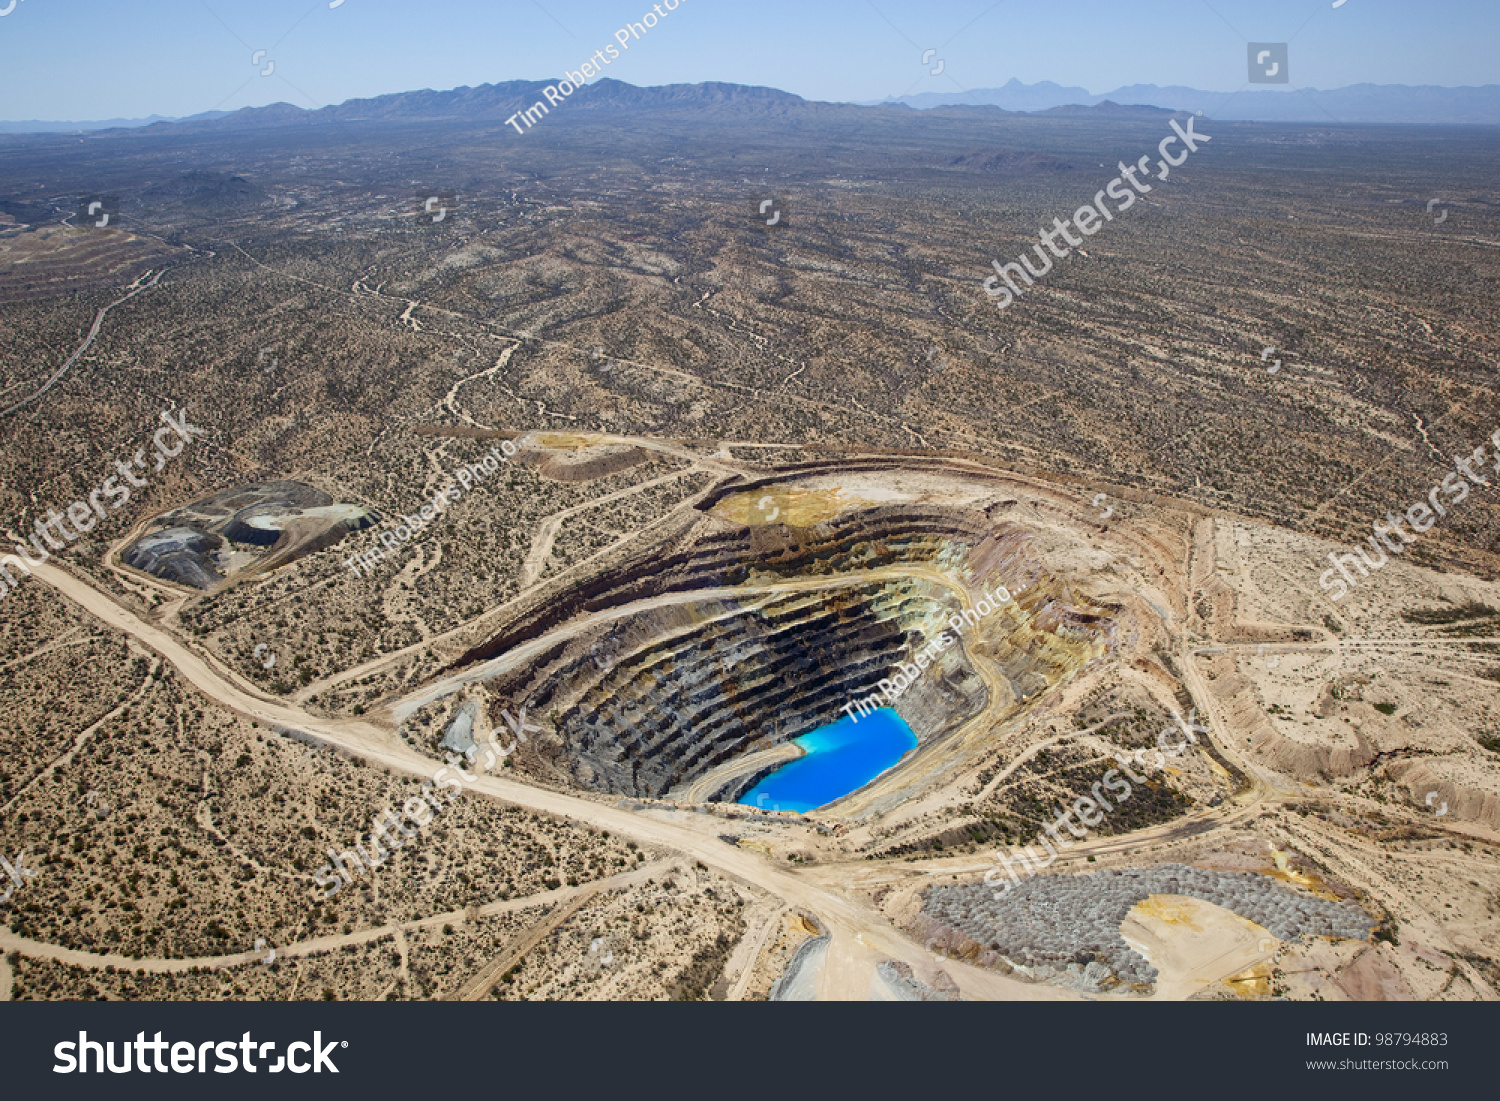 Aerial View Open Pit Copper Mine Stock Photo 98794883 ...